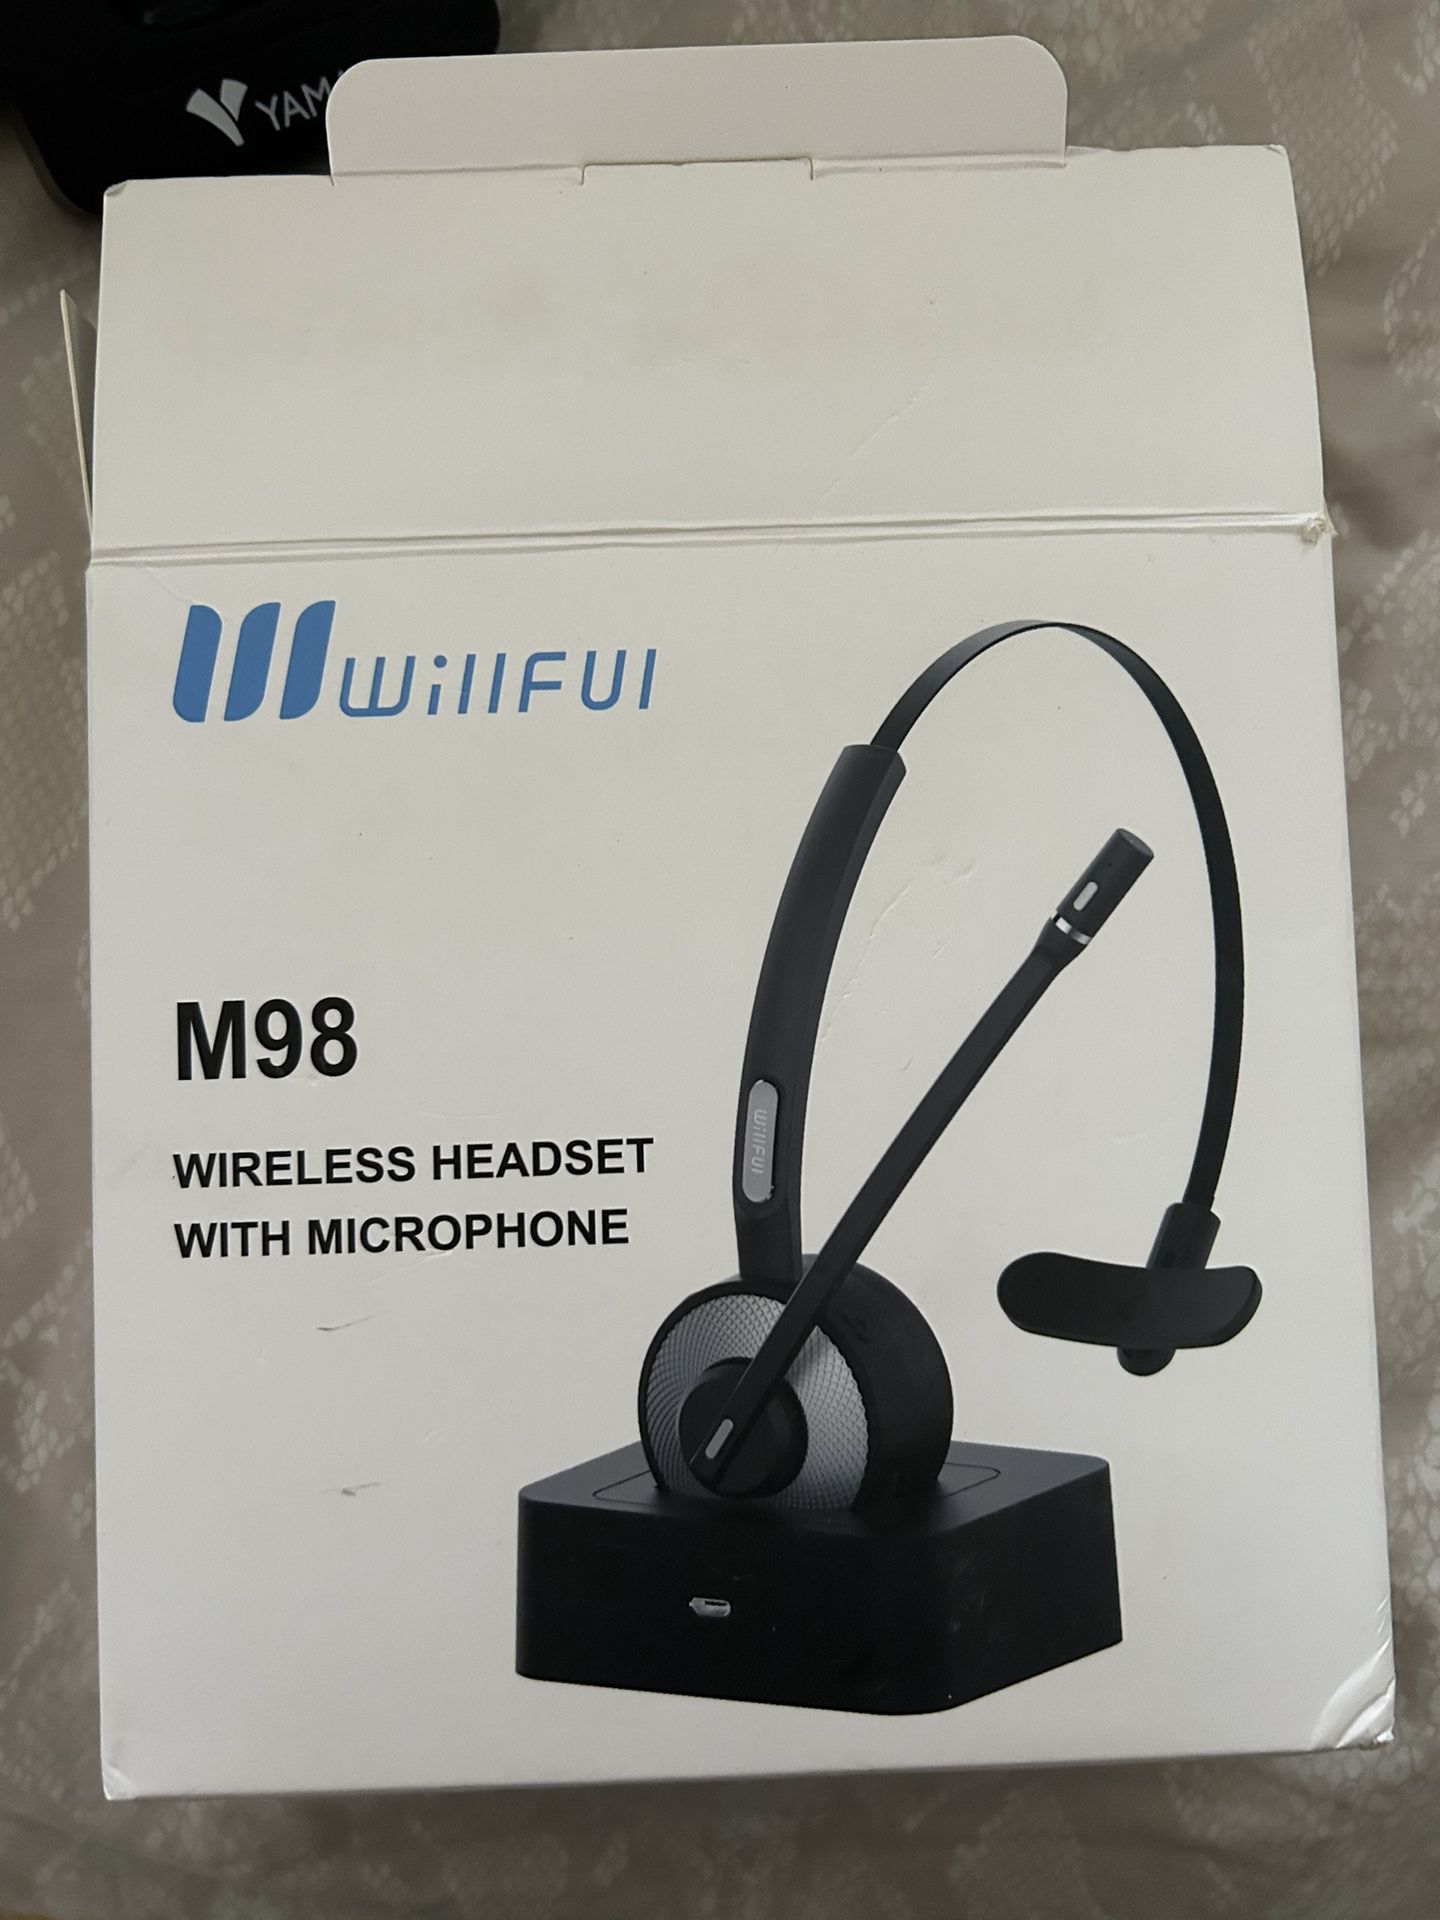 Wireless Headset With Microphone M98 